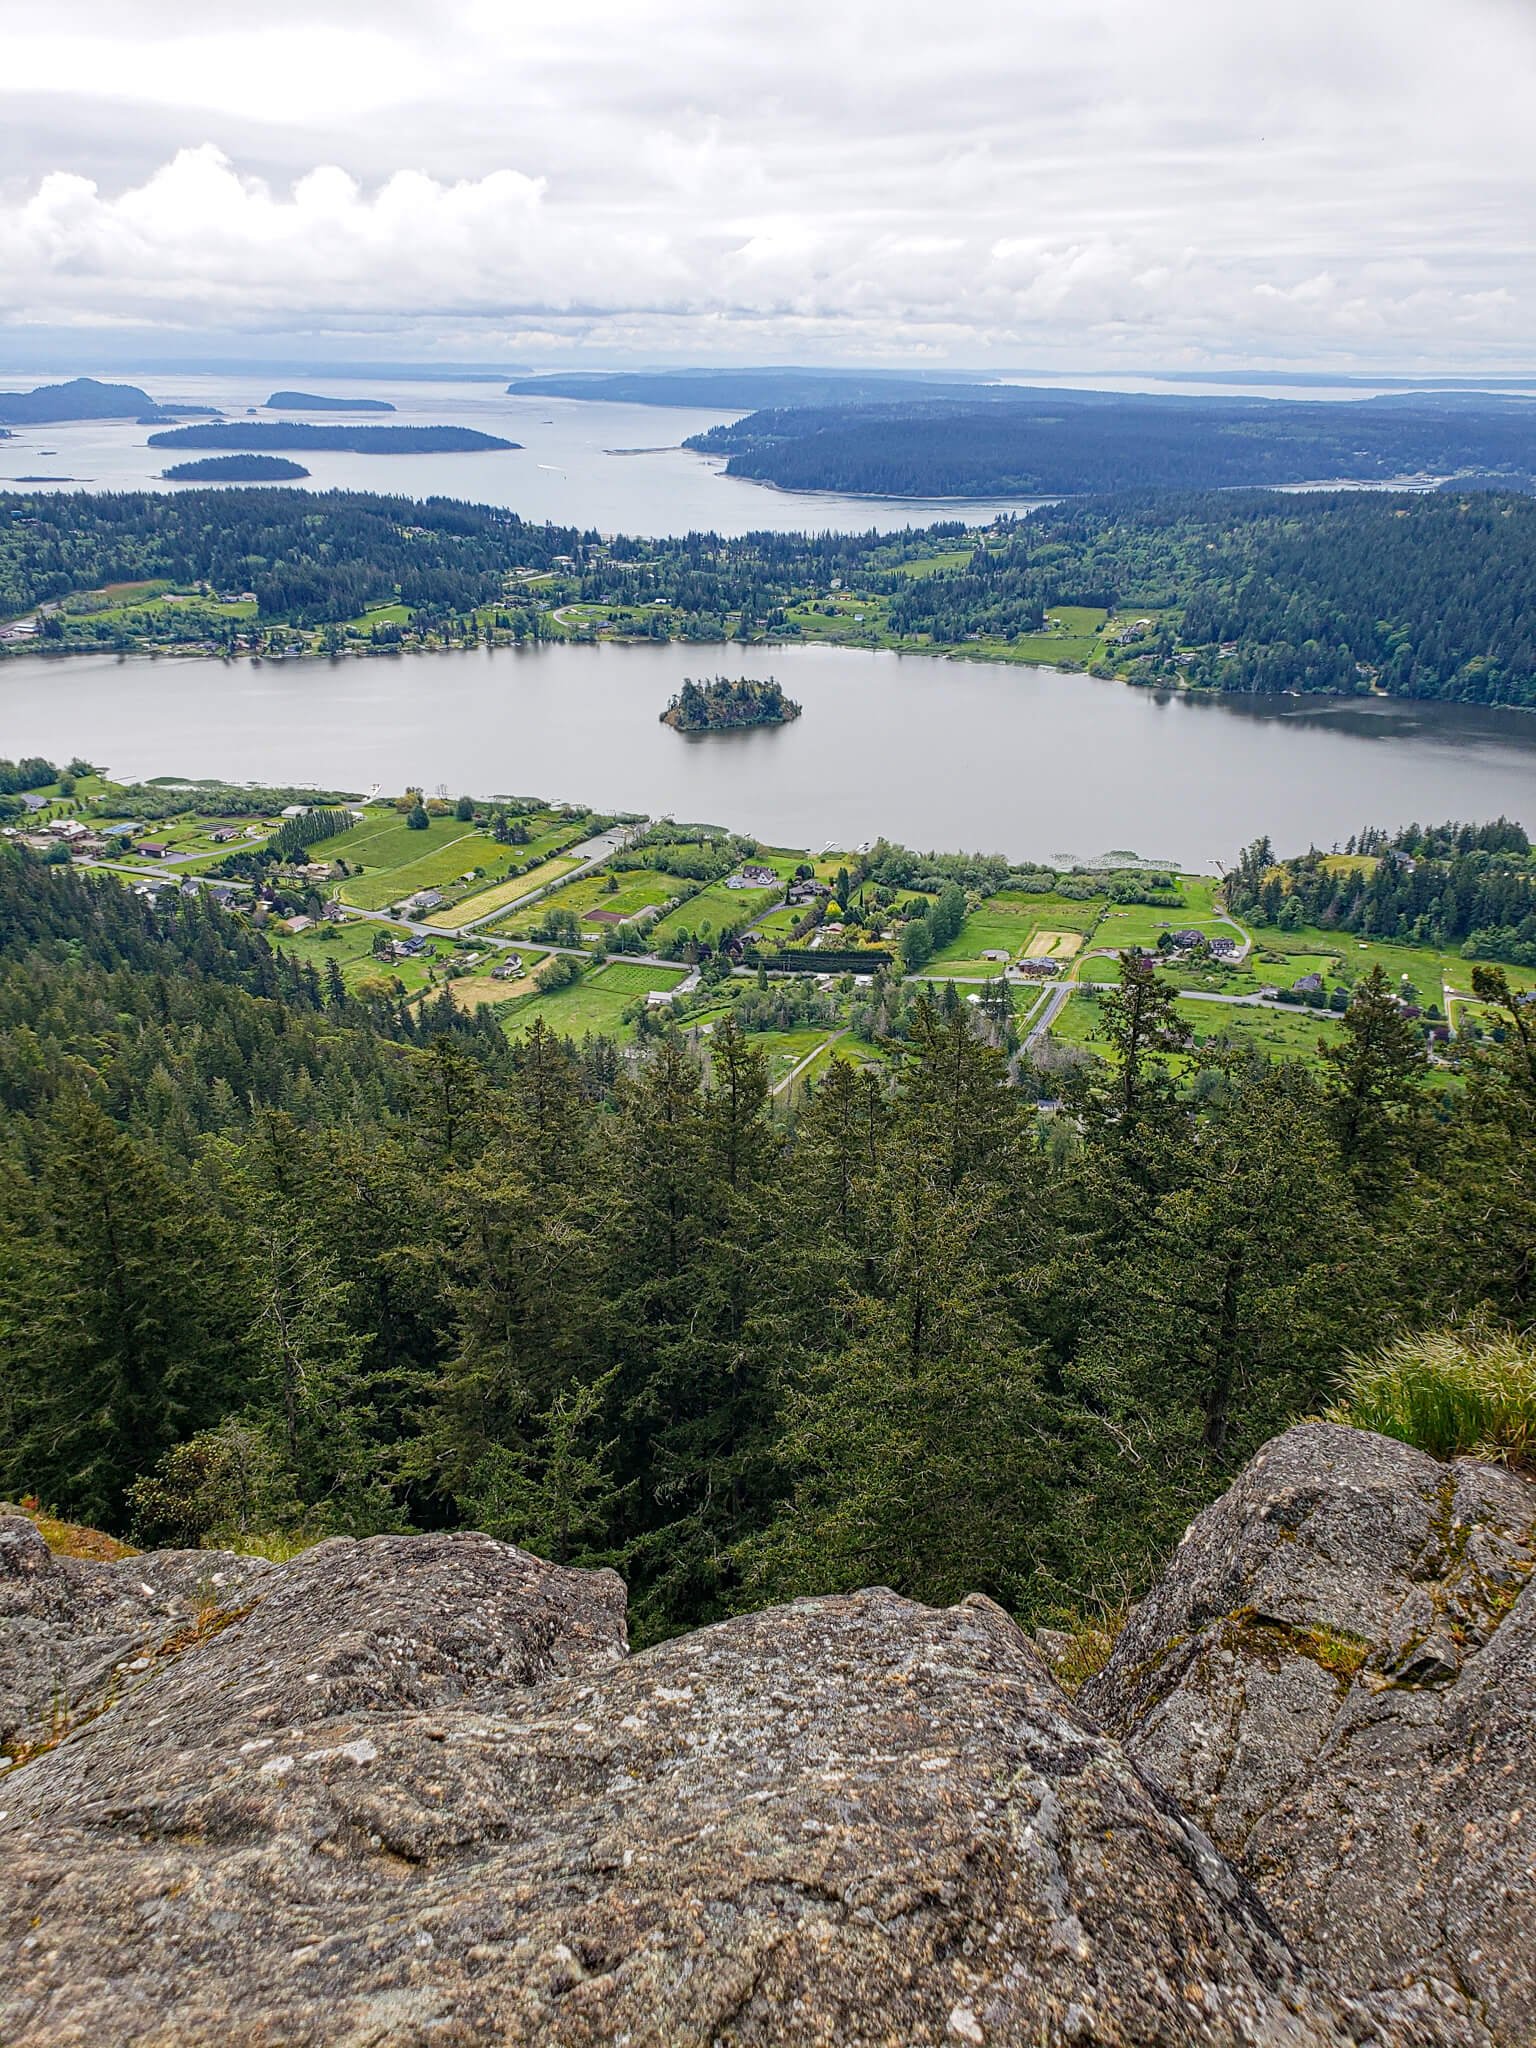 Mt Erie Viewpoint in Anacortes WA